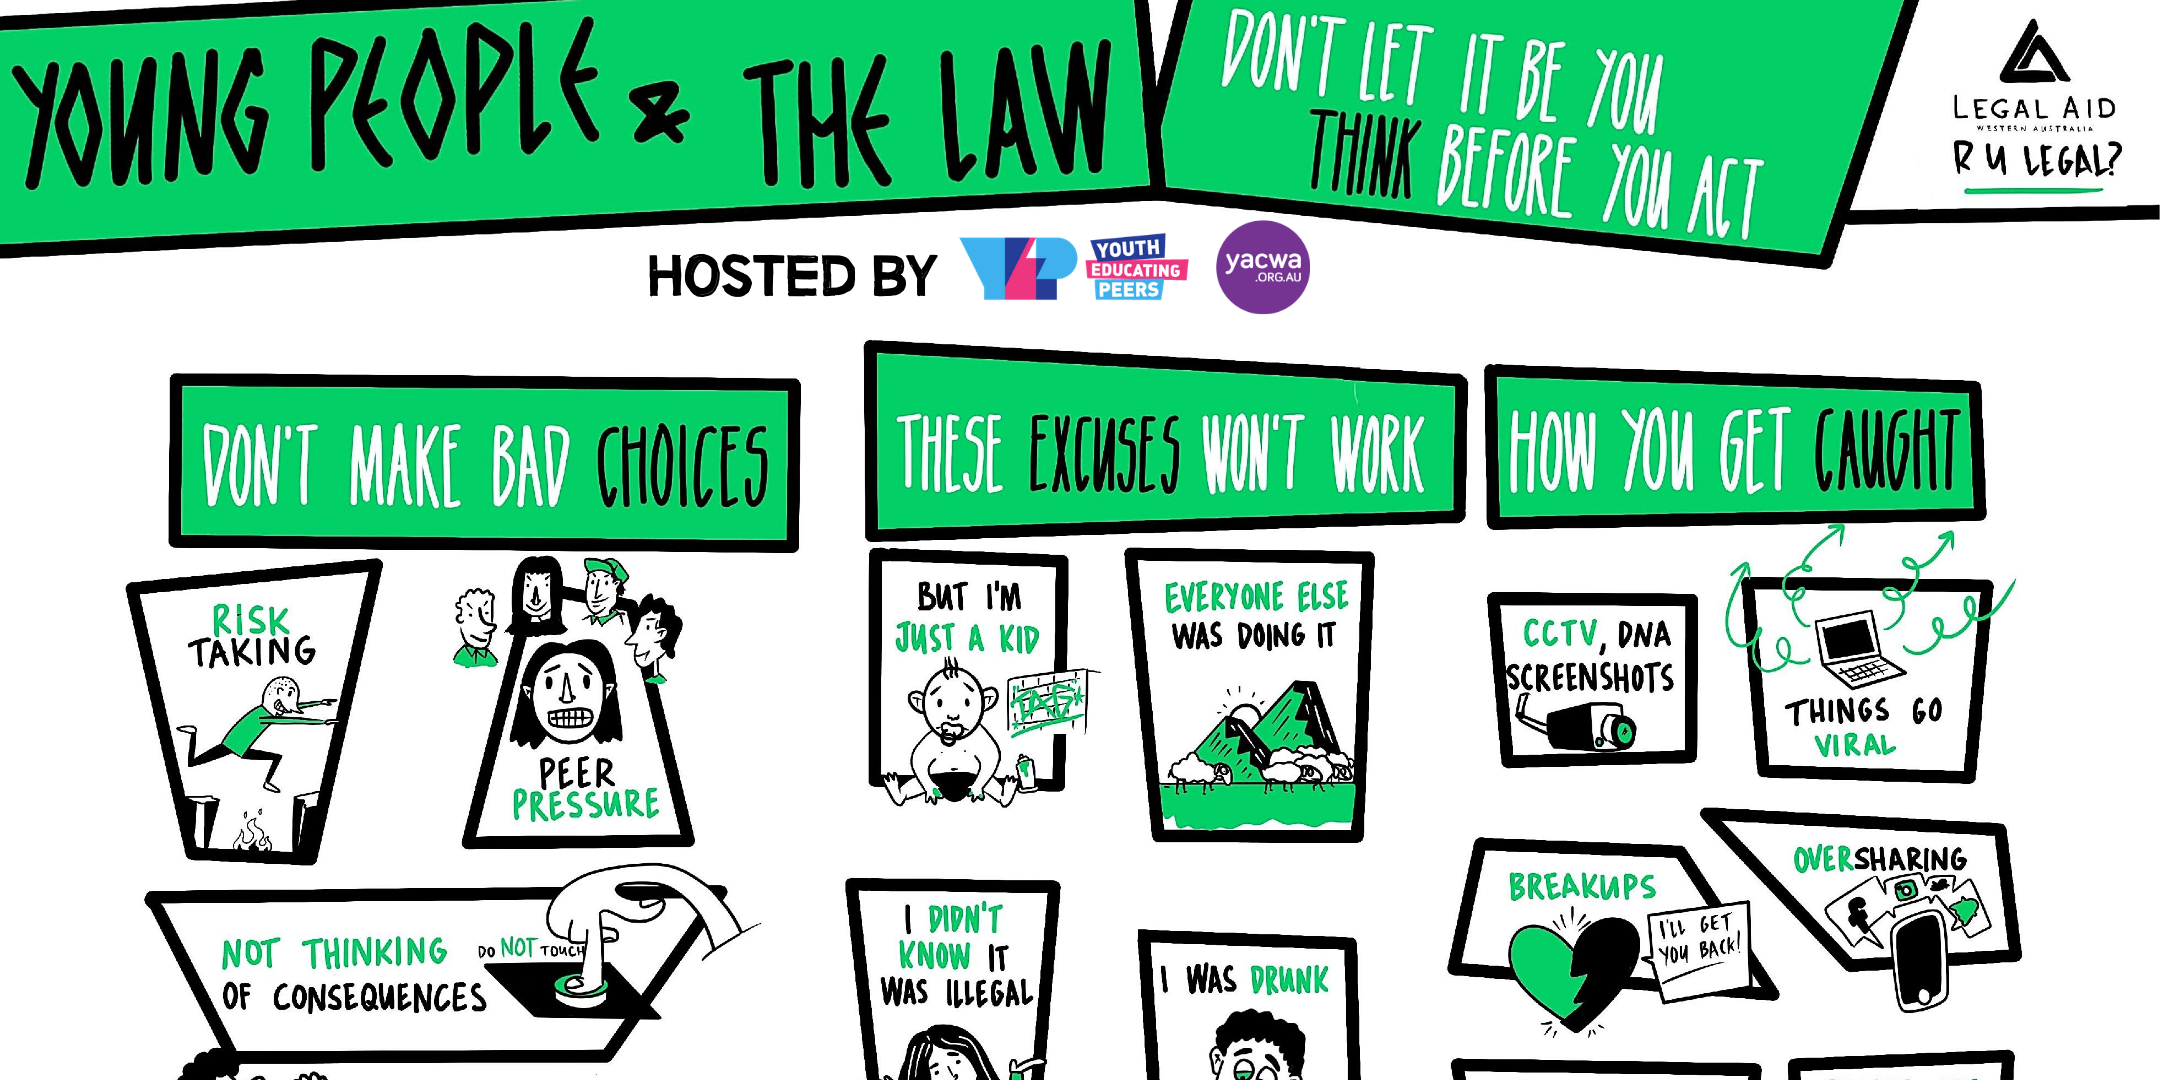 R U Legal? - Young People and the Law. A training for youth workers.